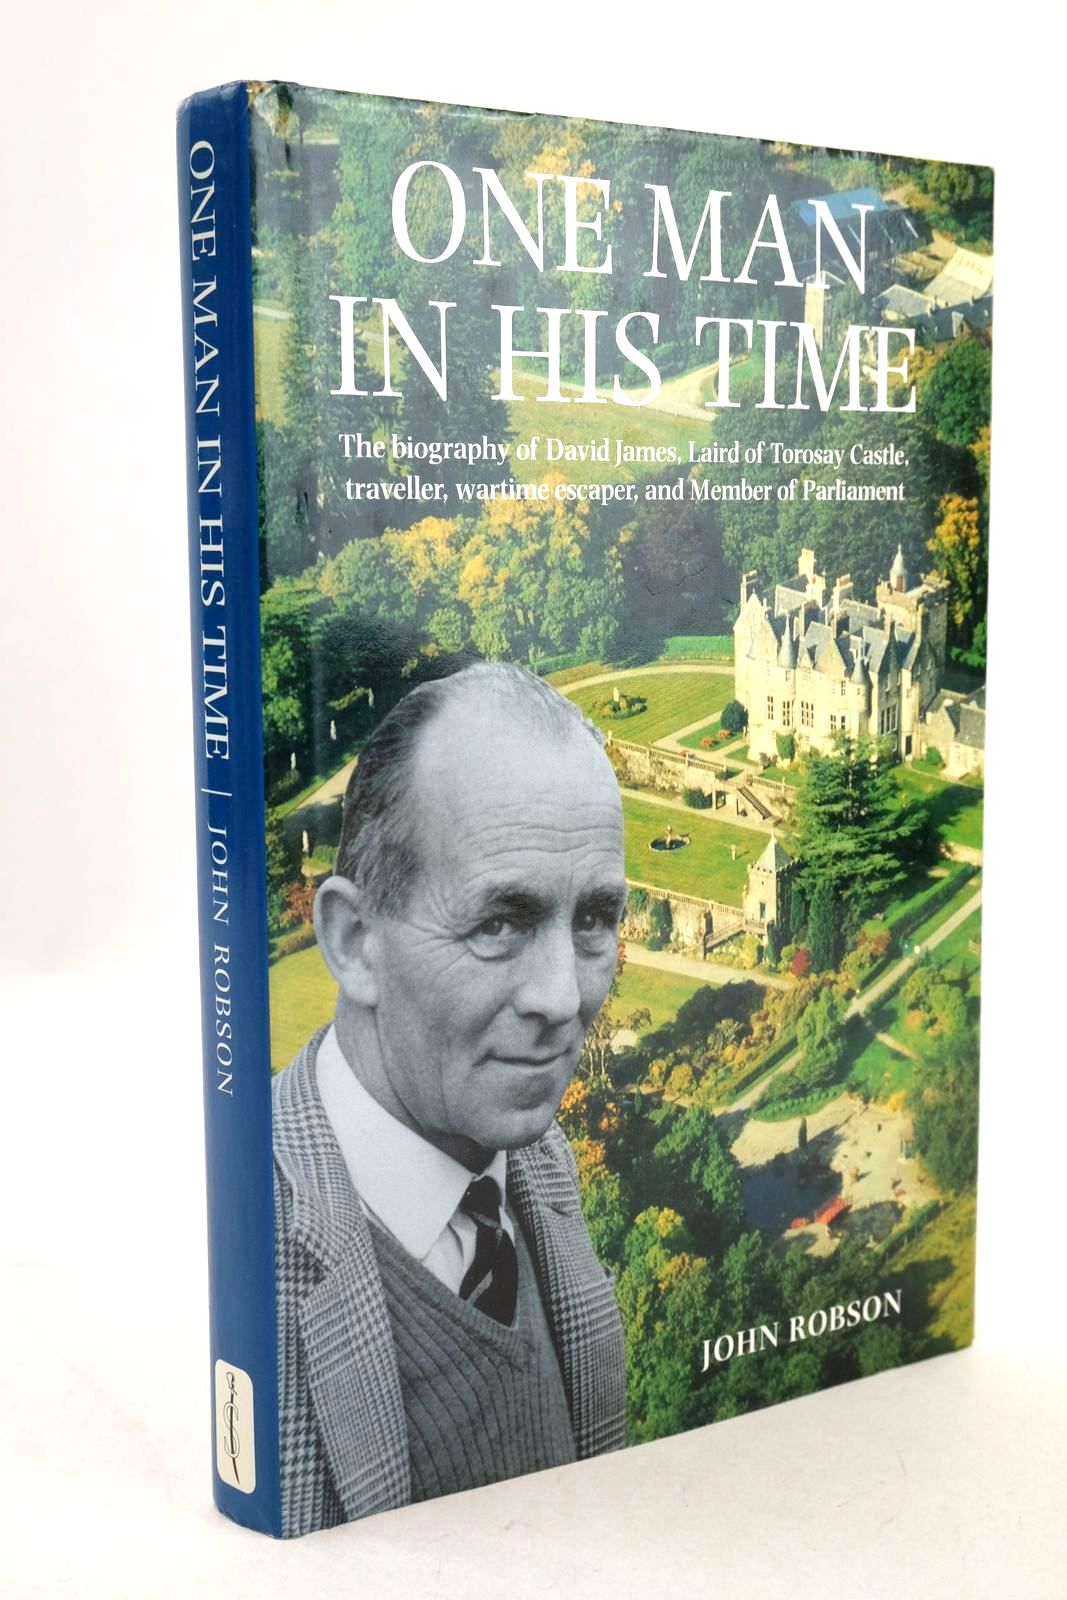 Photo of ONE MAN IN HIS TIME written by Robson, John published by Spellmount Ltd. (STOCK CODE: 1326547)  for sale by Stella & Rose's Books